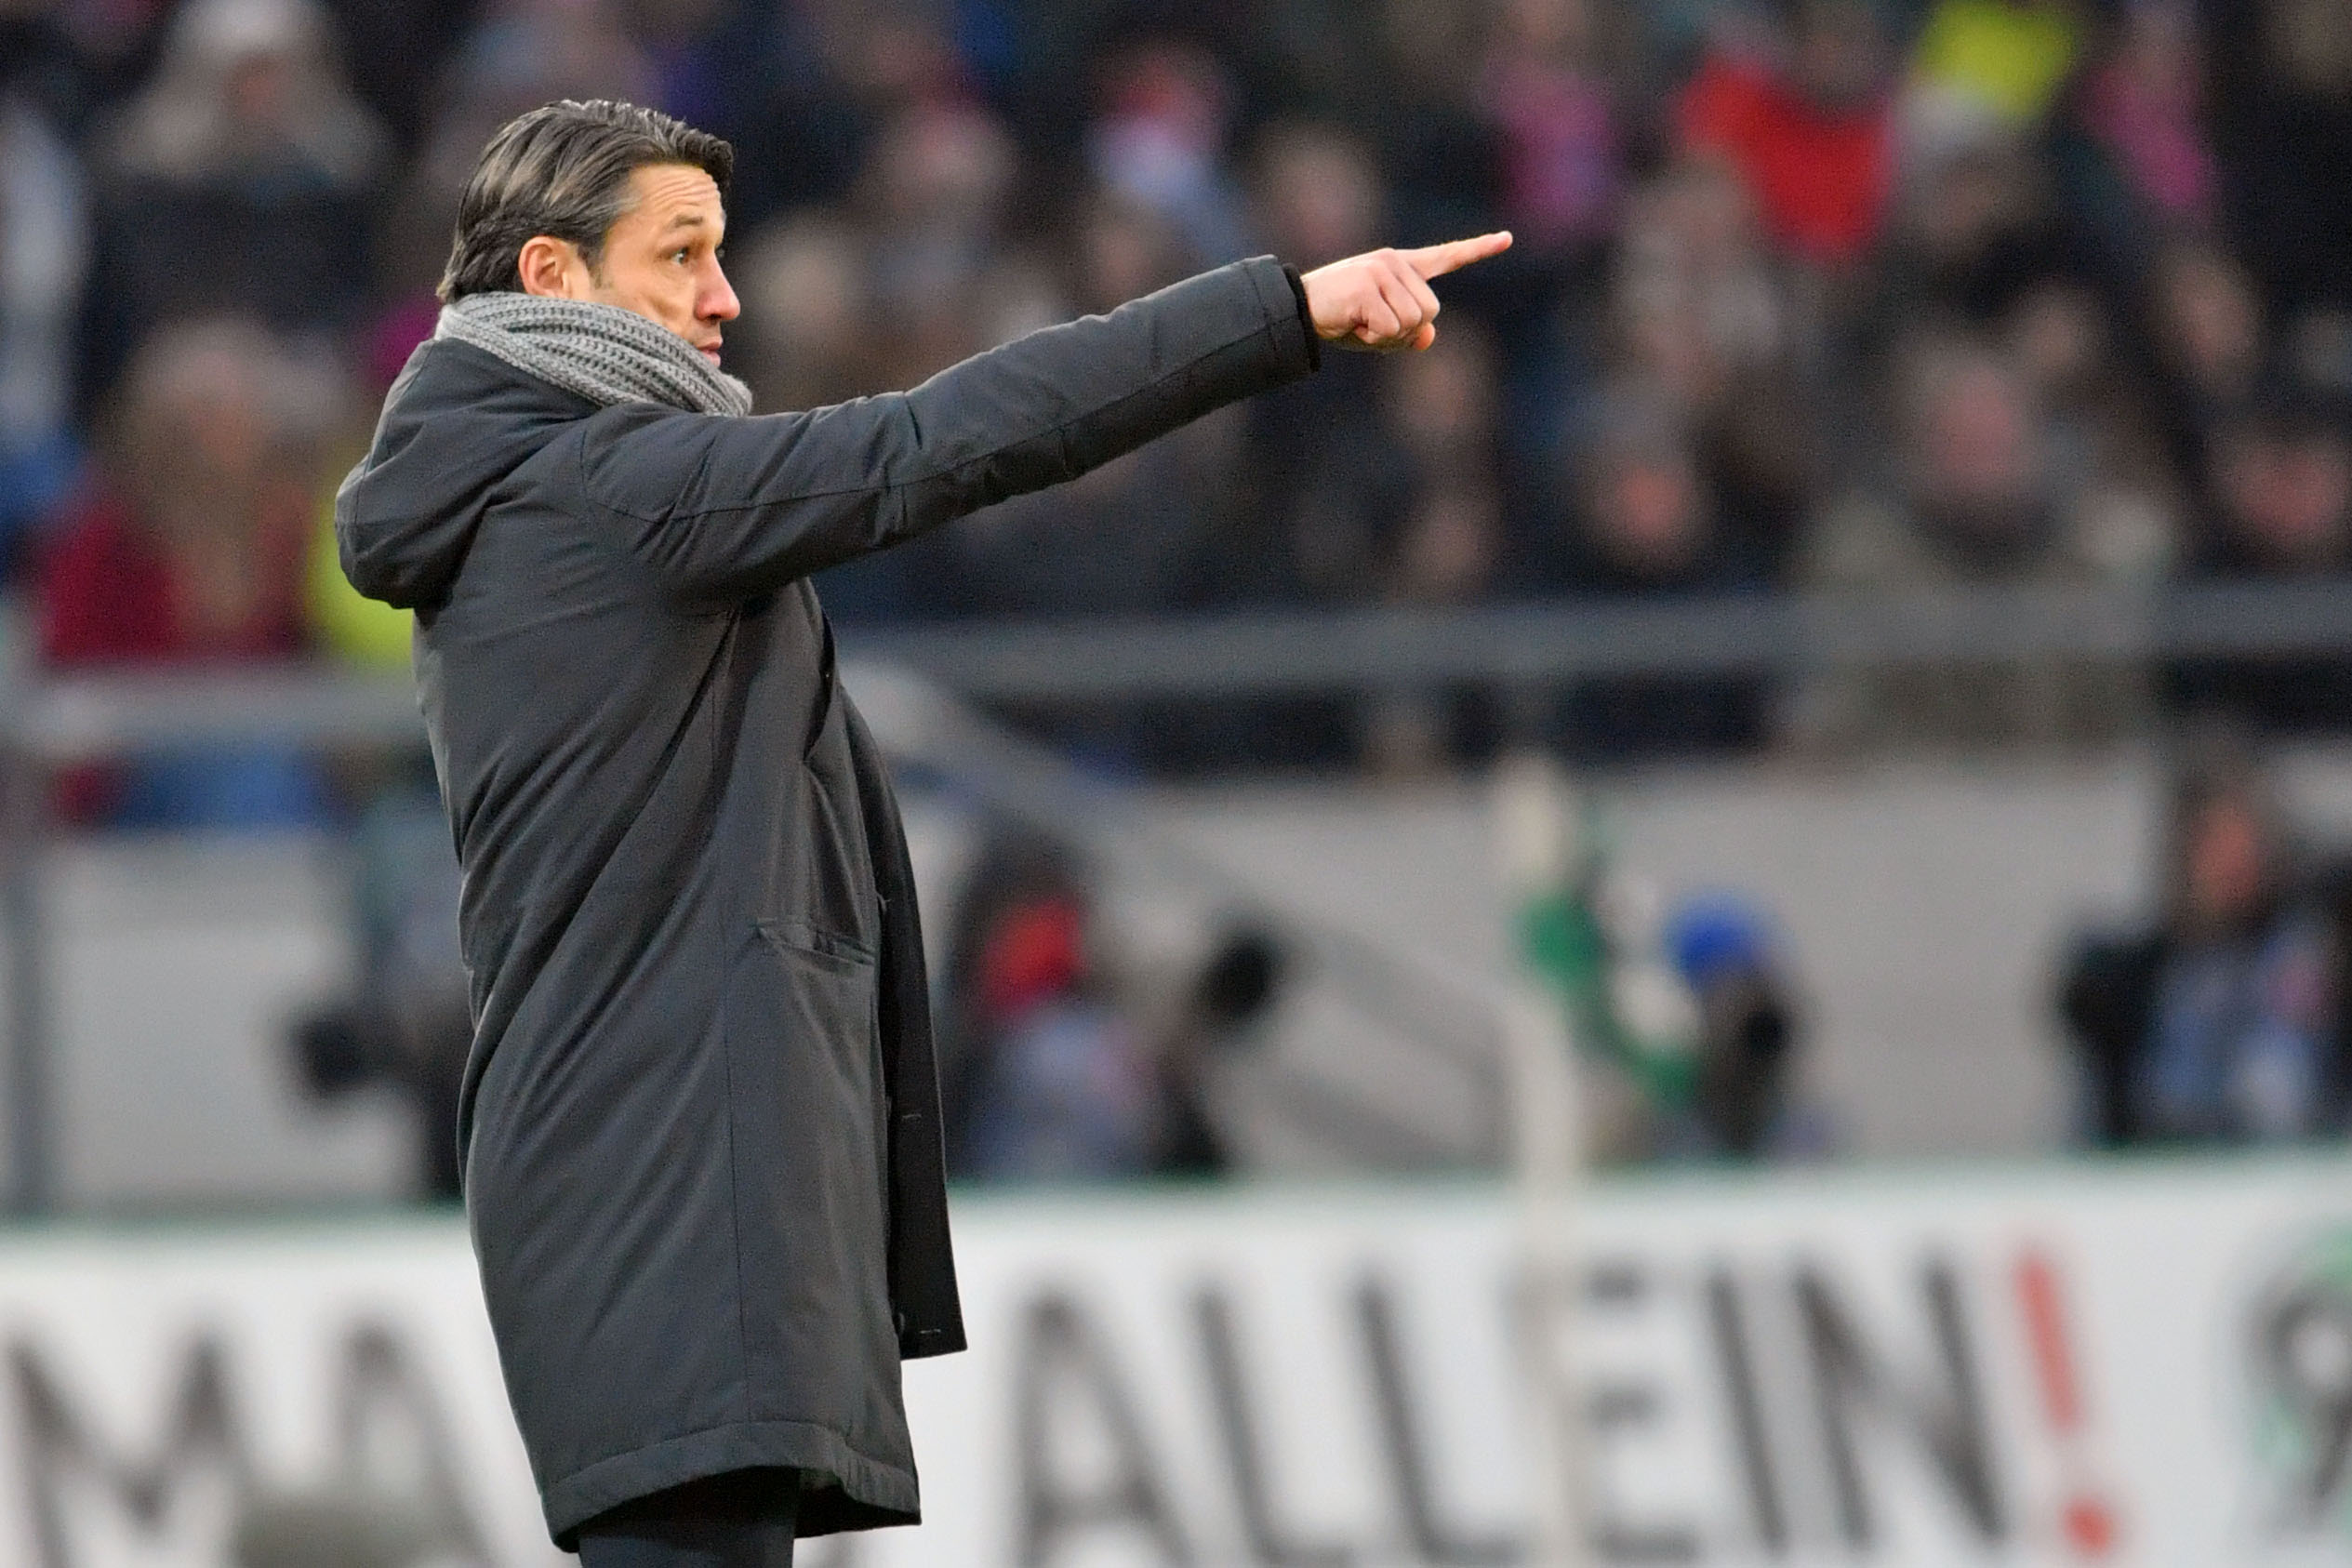 HANOVER, GERMANY - DECEMBER 15: Head coach Niko Kovac of Muenchen gives advice to his team during the Bundesliga match between Hannover 96 and FC Bayern Muenchen at HDI-Arena on December 15, 2018 in Hanover, Germany. (Photo by Thomas Starke/Bongarts/Getty Images)